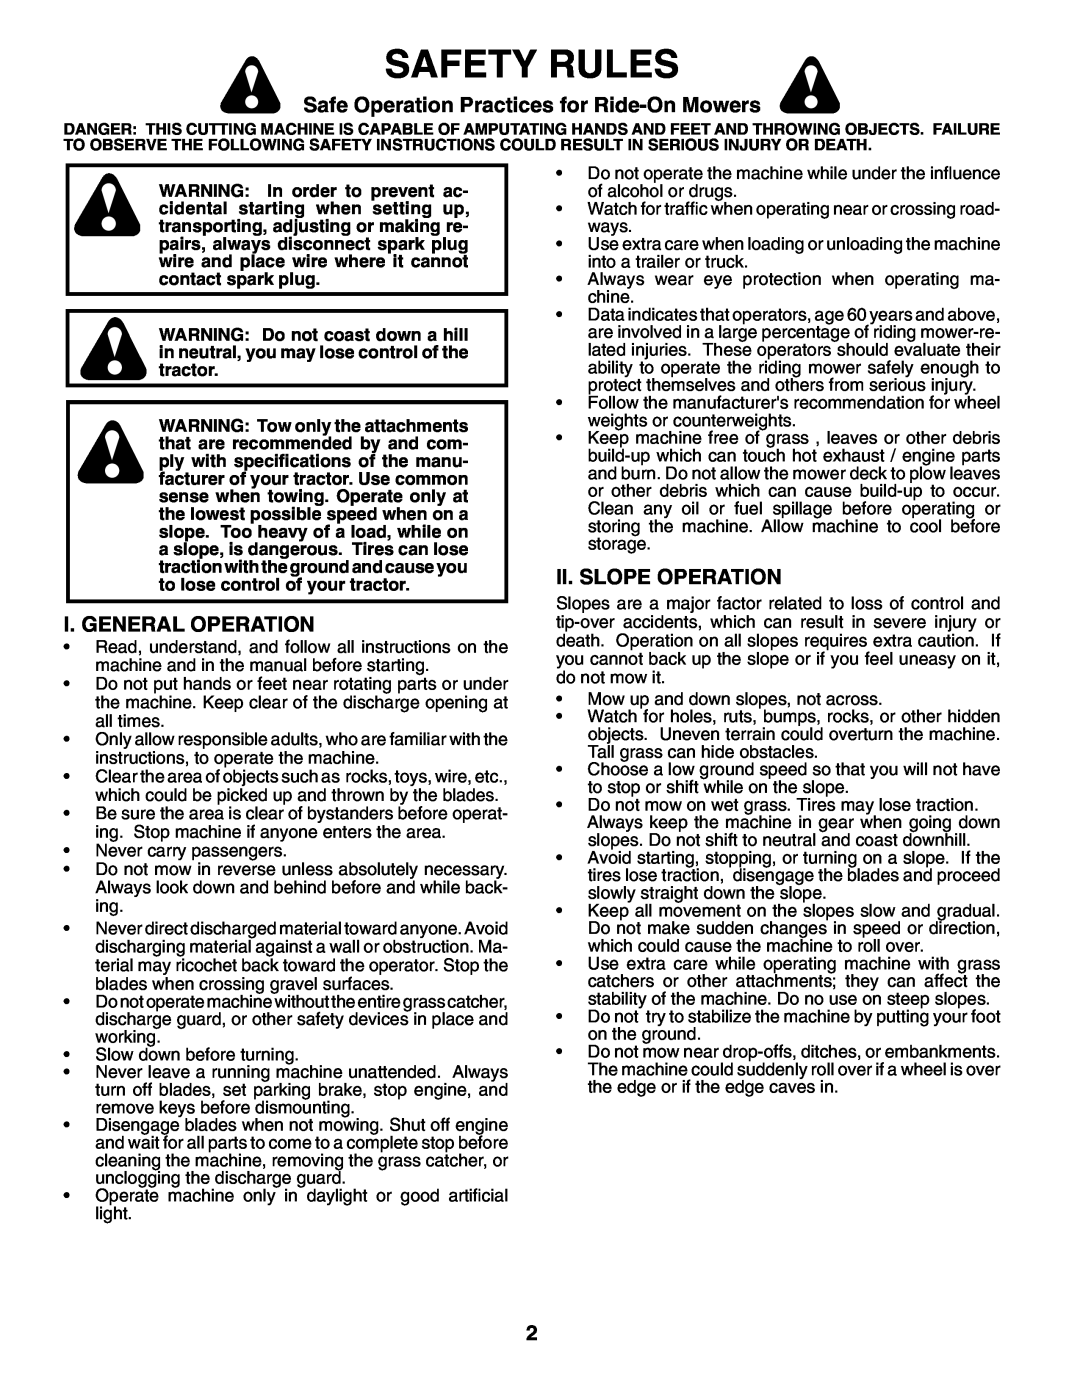 Husqvarna YTH2754XP Safety Rules, Safe Operation Practices for Ride-OnMowers, I. General Operation, Ii. Slope Operation 